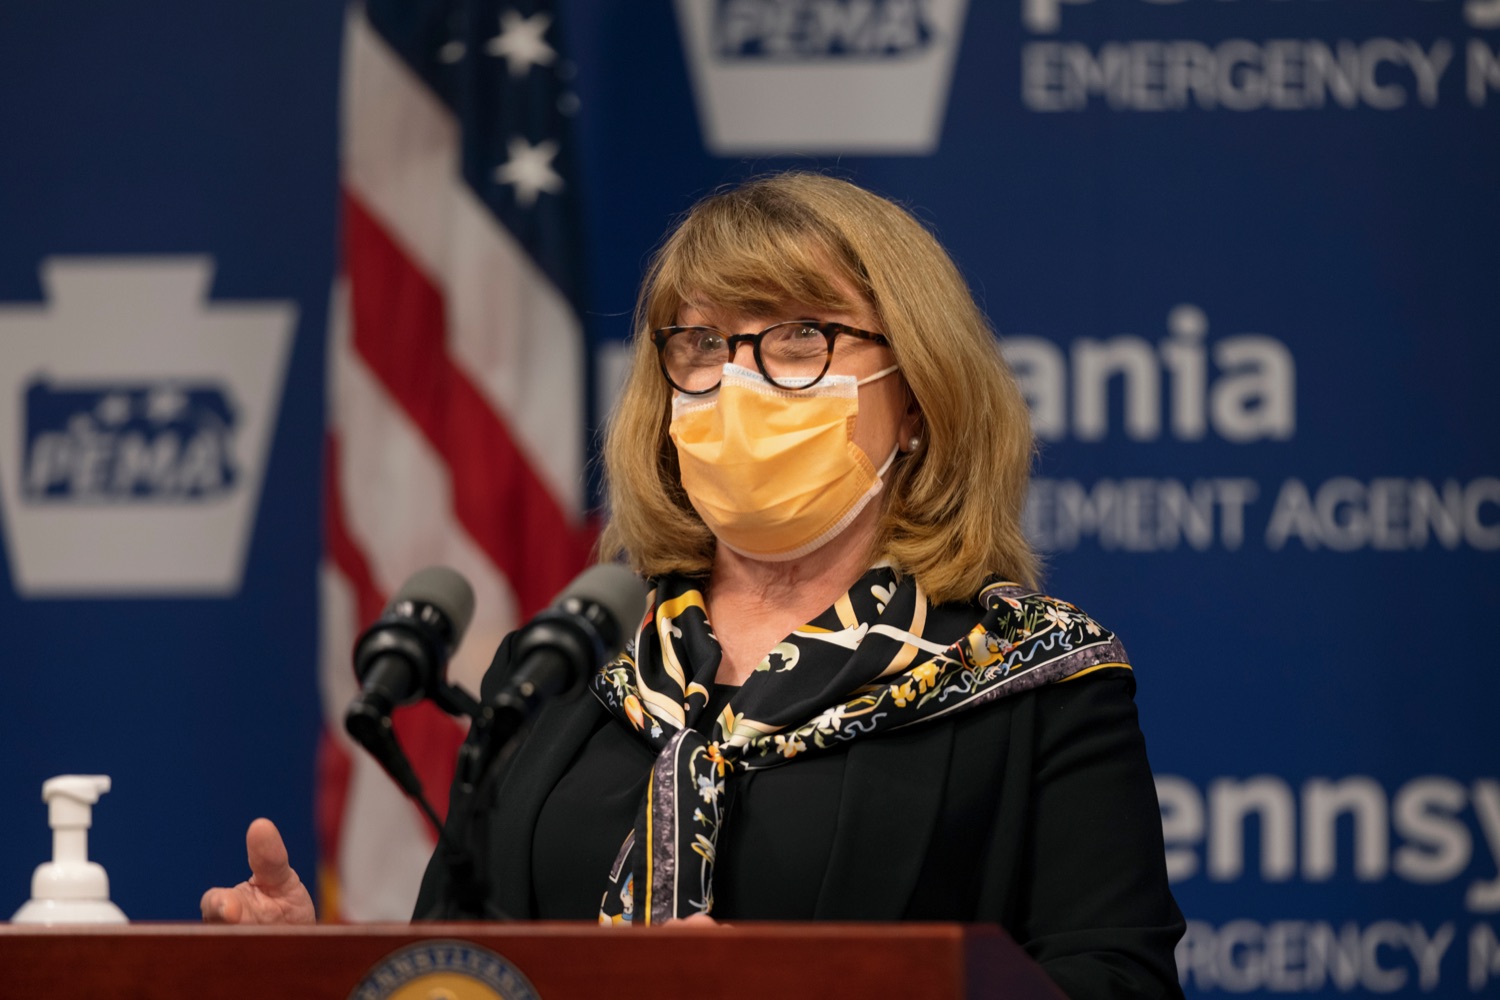 President of the Pennsylvania Chapter of the American Academy of Pediatrics Dr. Trude Haecker speaks during a press conference, which discussed the current state of COVID-19 and a new Secretary of Health order requiring masks to be worn inside K-12 school buildings, early learning programs and child care providers, inside Pennsylvania Emergency Management Agency in Harrisburg on Tuesday, August 31, 2021.<br><a href="https://filesource.amperwave.net/commonwealthofpa/photo/19089_GOV_School_Masking_NK_008.jpg" target="_blank">⇣ Download Photo</a>